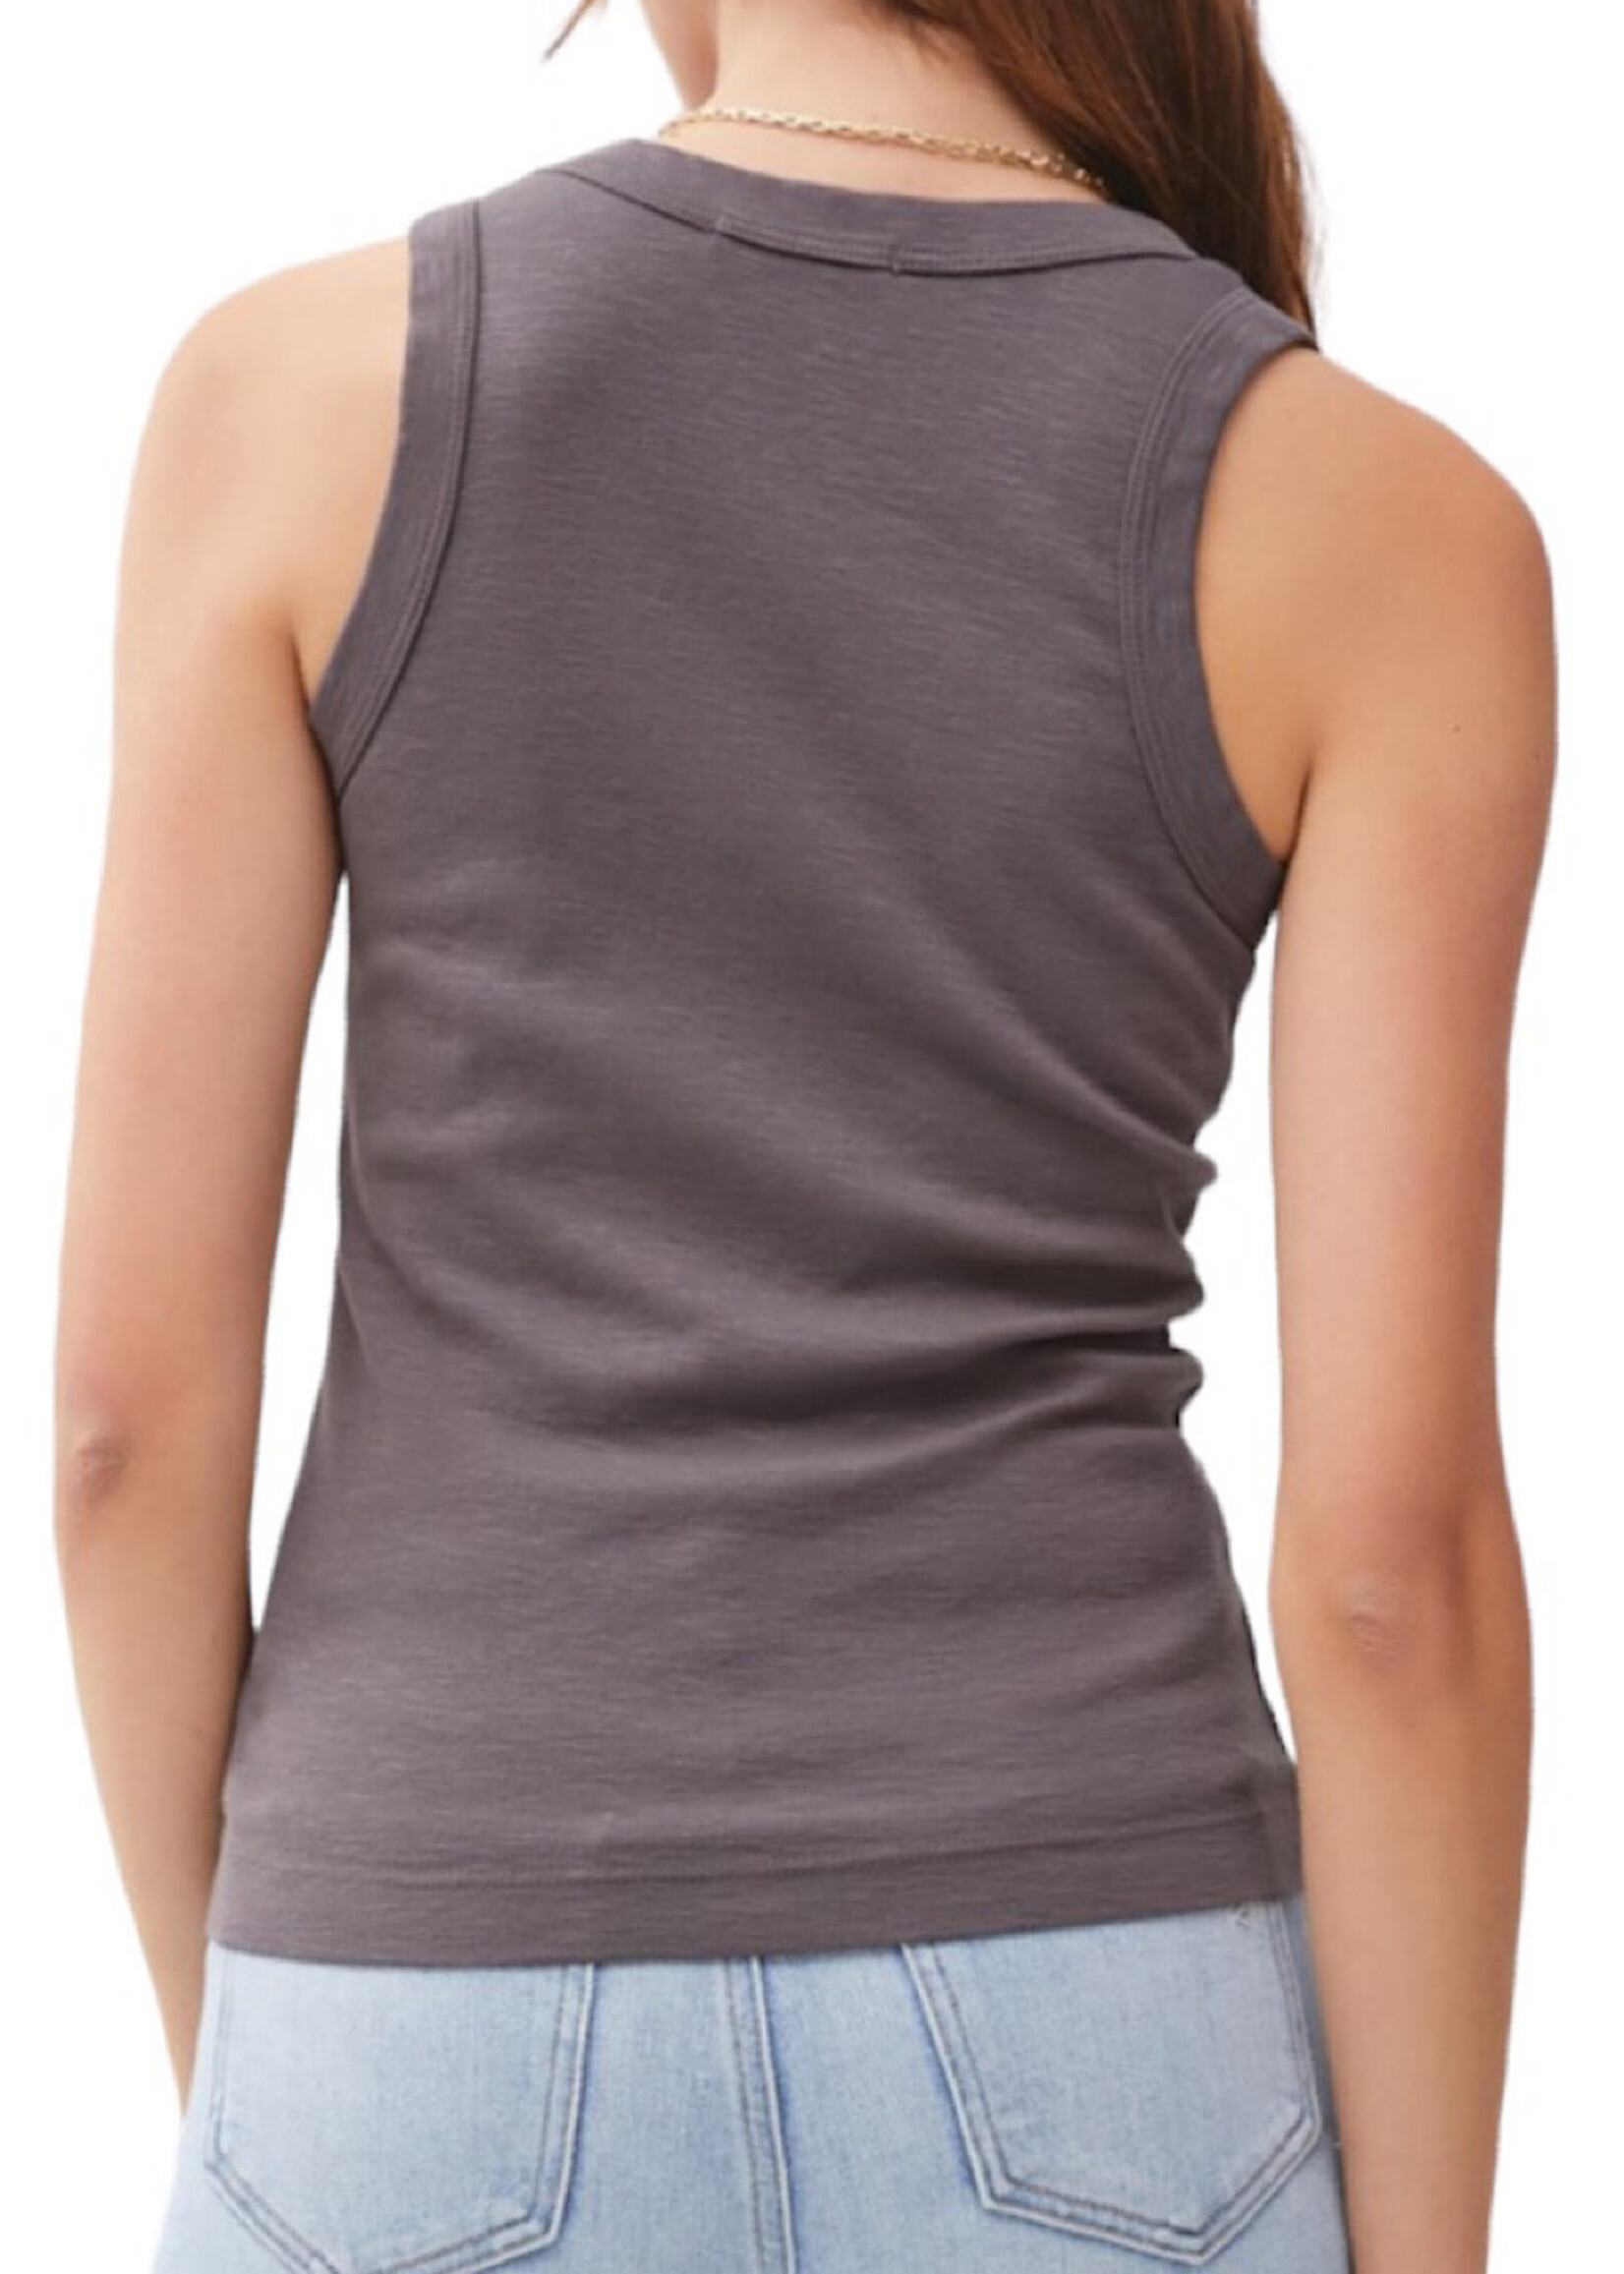 Charcoal Dyed Cotton V-Neck Ribbed Tank